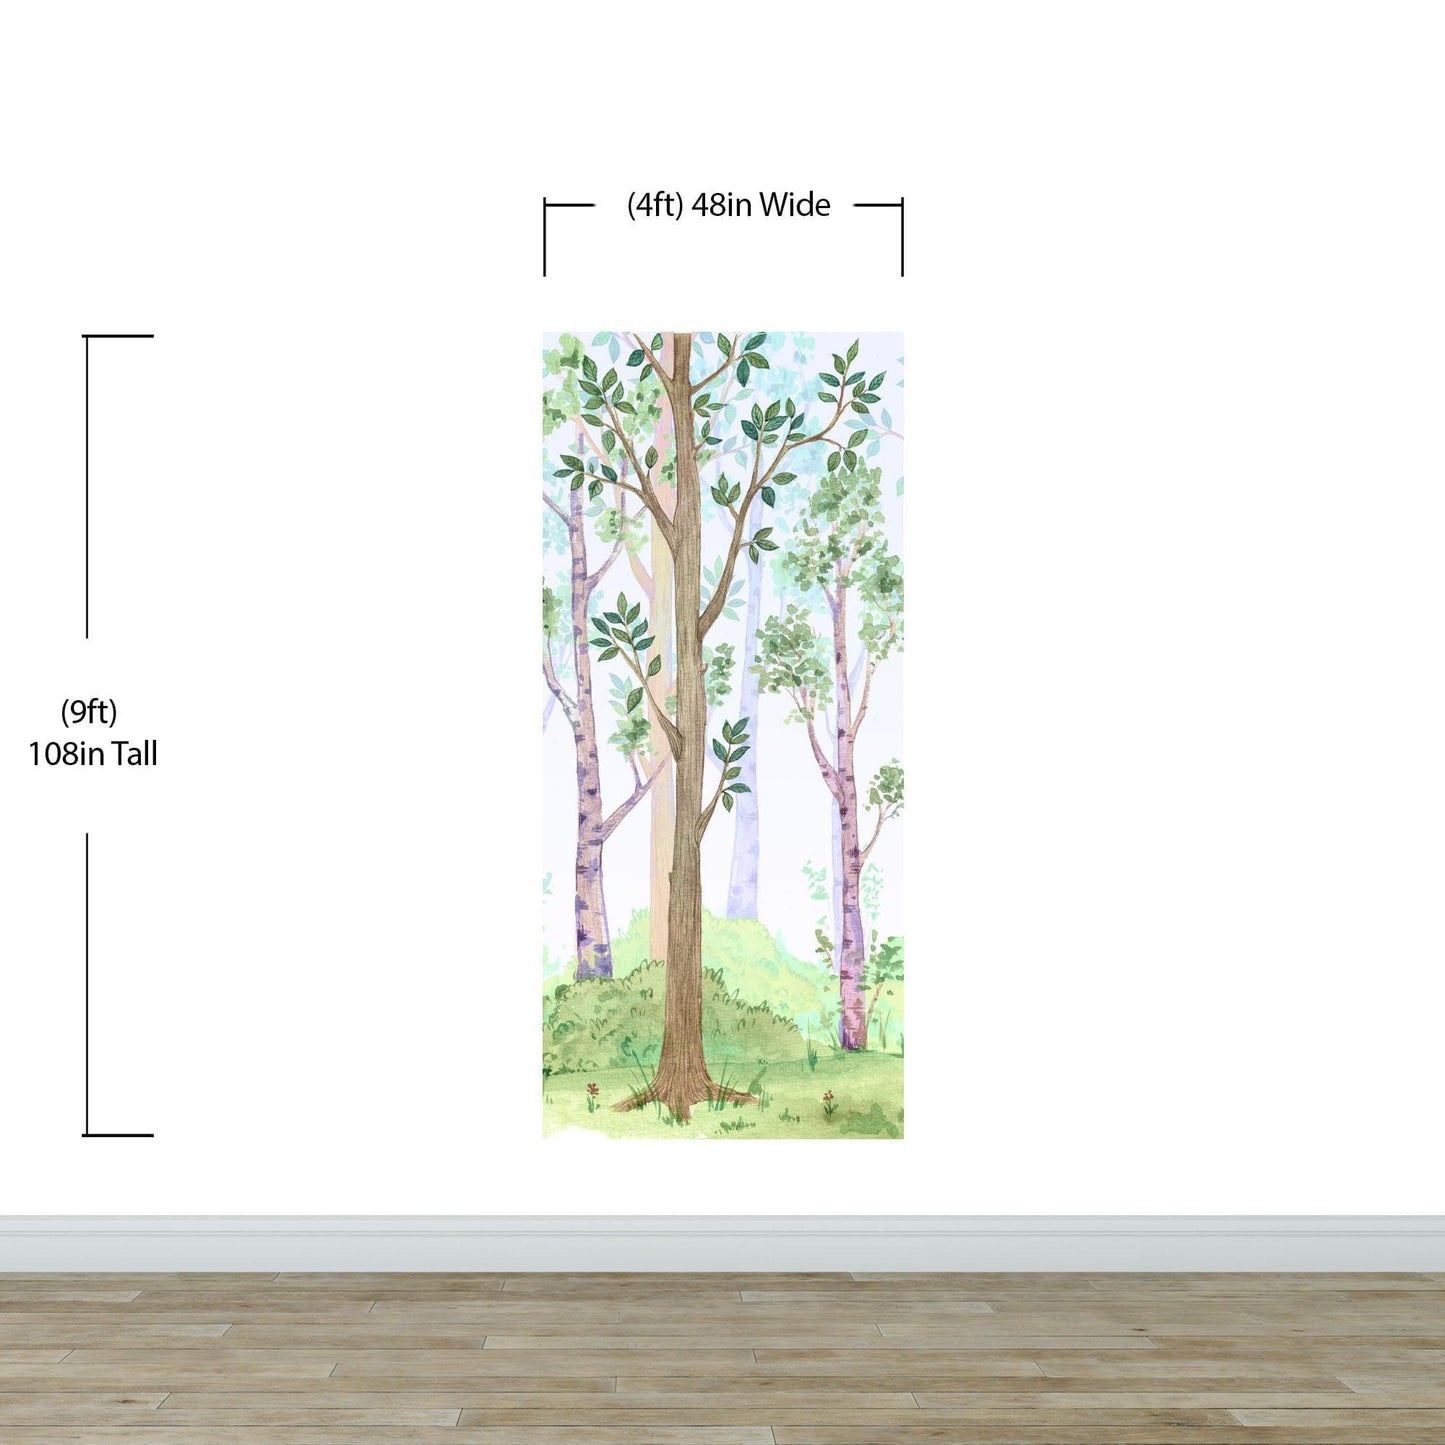 Colorful Nursery Woodland Forest Wallpaper. Watercolor Birch Tree Forest Wall Mural. #6527